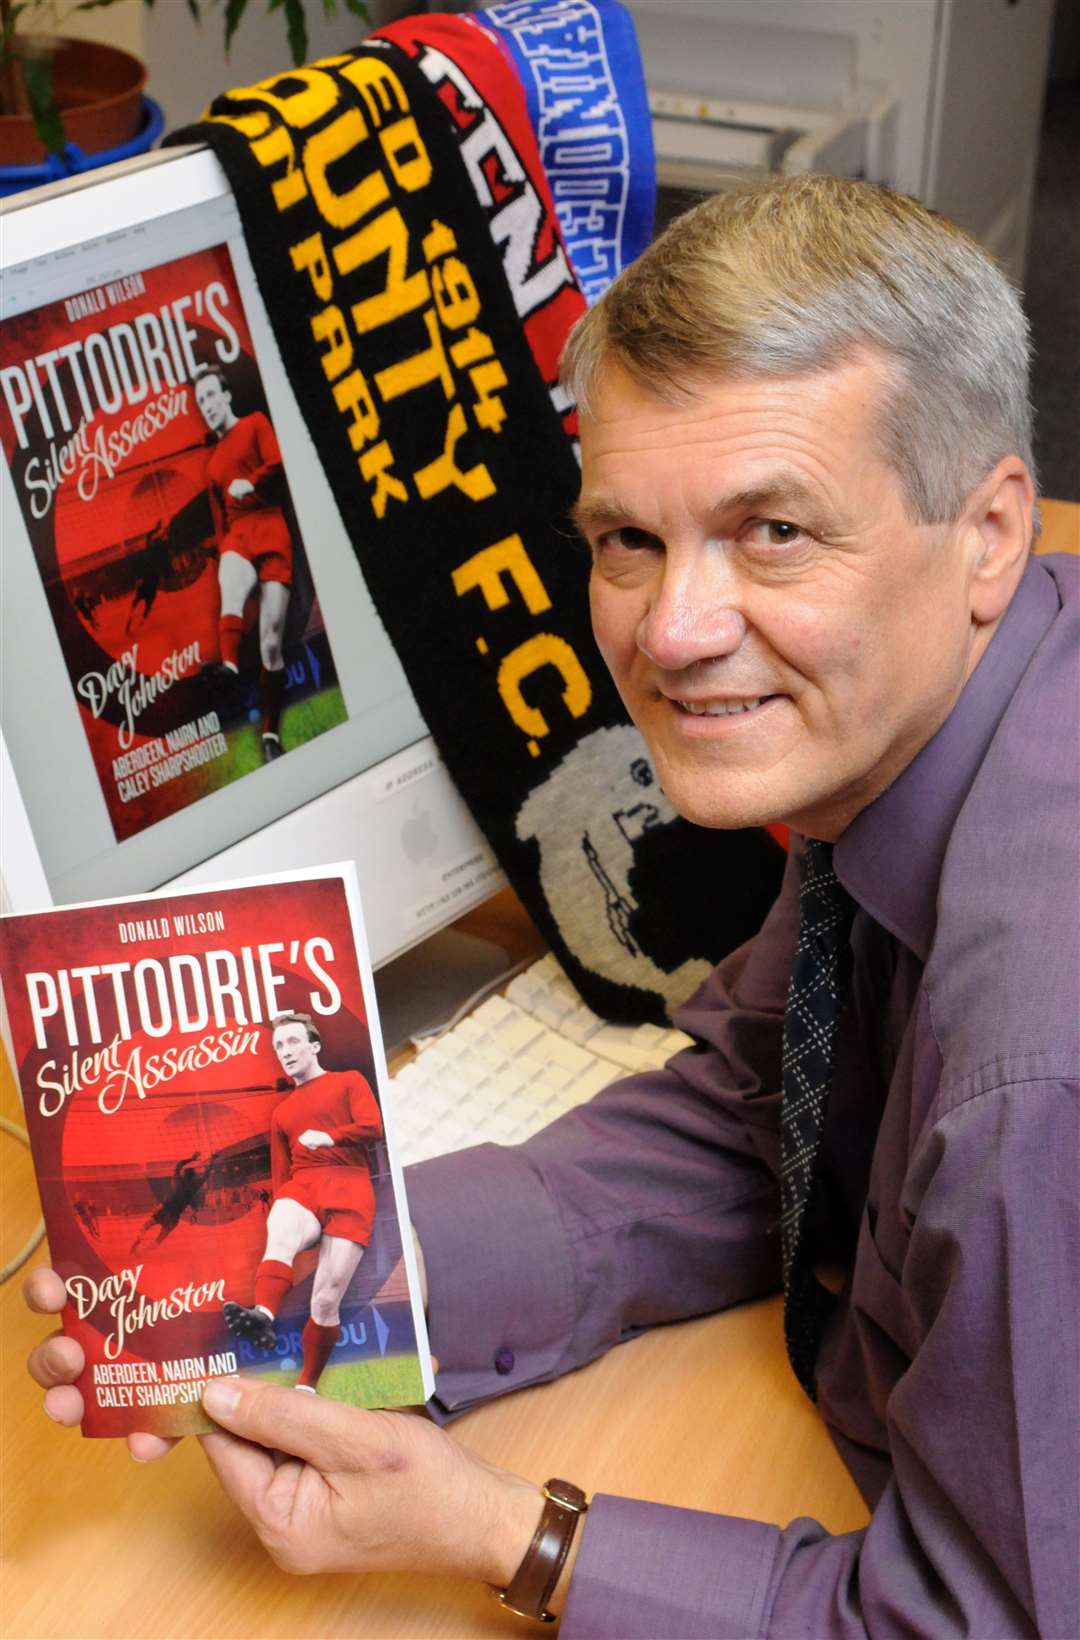 Donald wrote Pittodrie's Silent Assassin, a book about former Nairn and Aberdeen footballer Davy Johnston. Picture: Gary Anthony